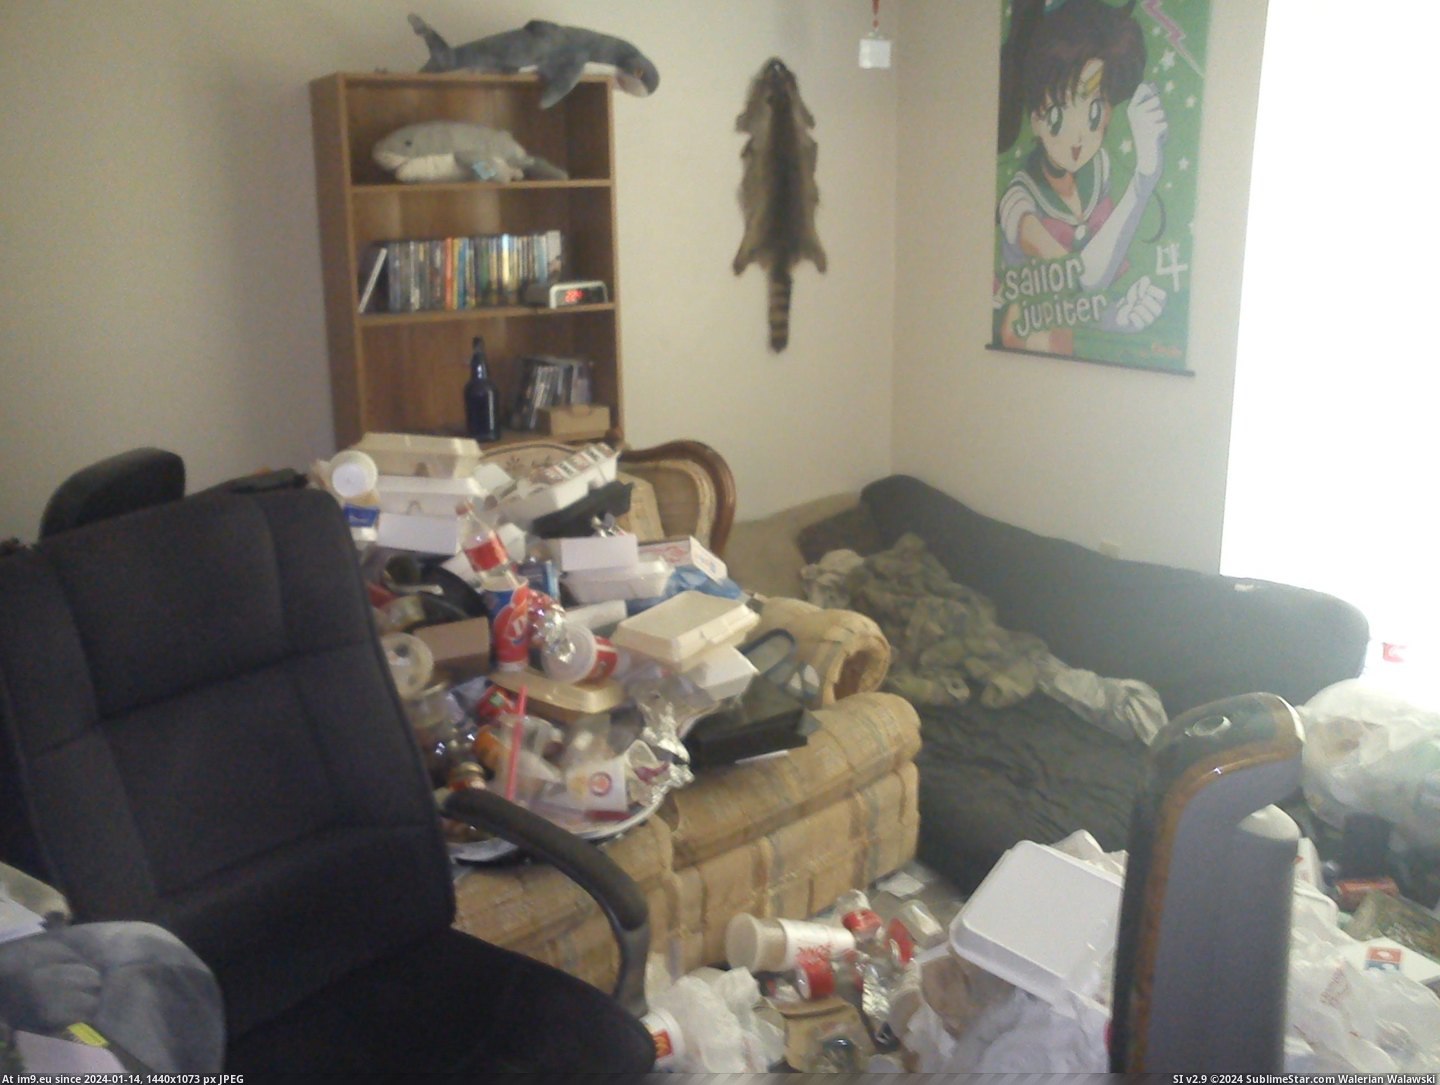 #Wtf #Summer #Roommate #Lives #Asked #Clean [Wtf] This is how my roommate lives. We've asked him to clean it since last summer, and he doesn't want to do it without help. H Pic. (Image of album My r/WTF favs))